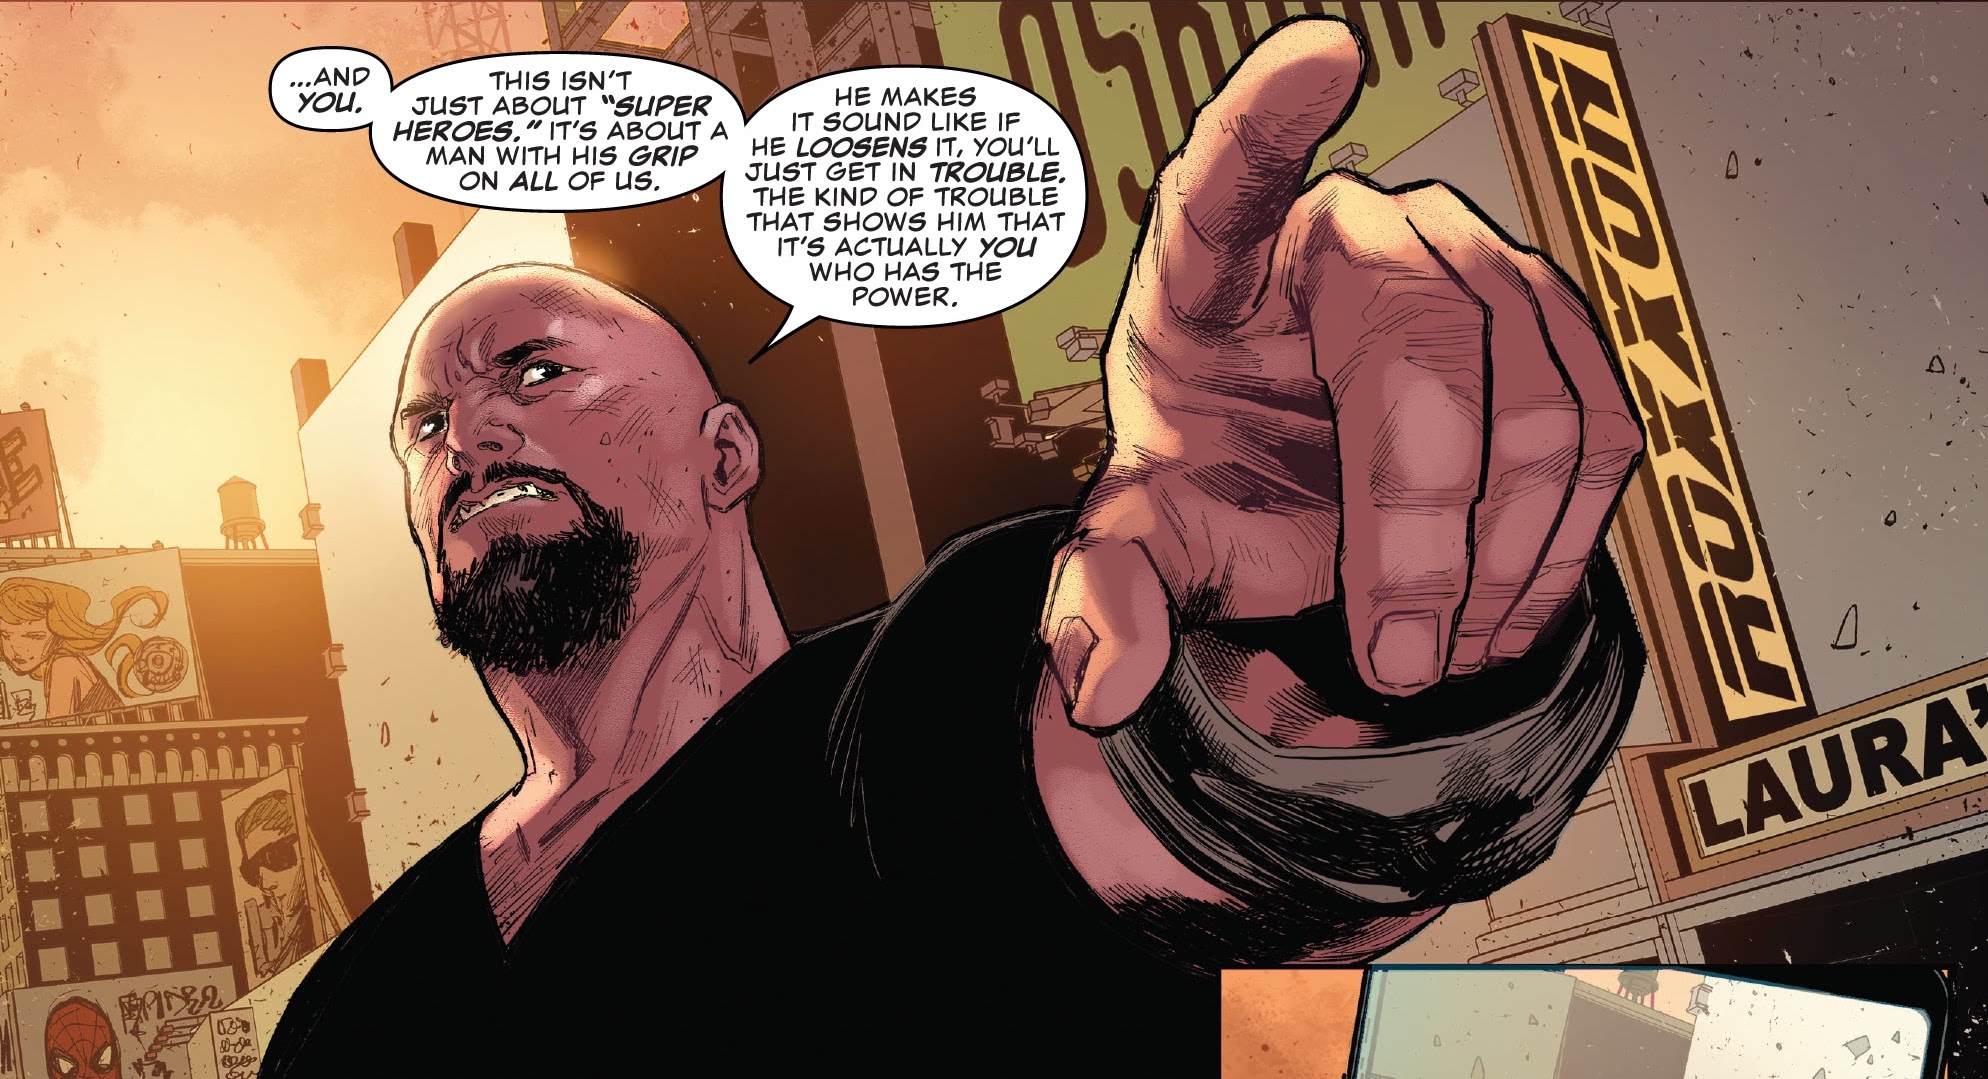 Luke Cage gives a stirring speech on a street in NYC in Devil’s Reign #1 (2021).